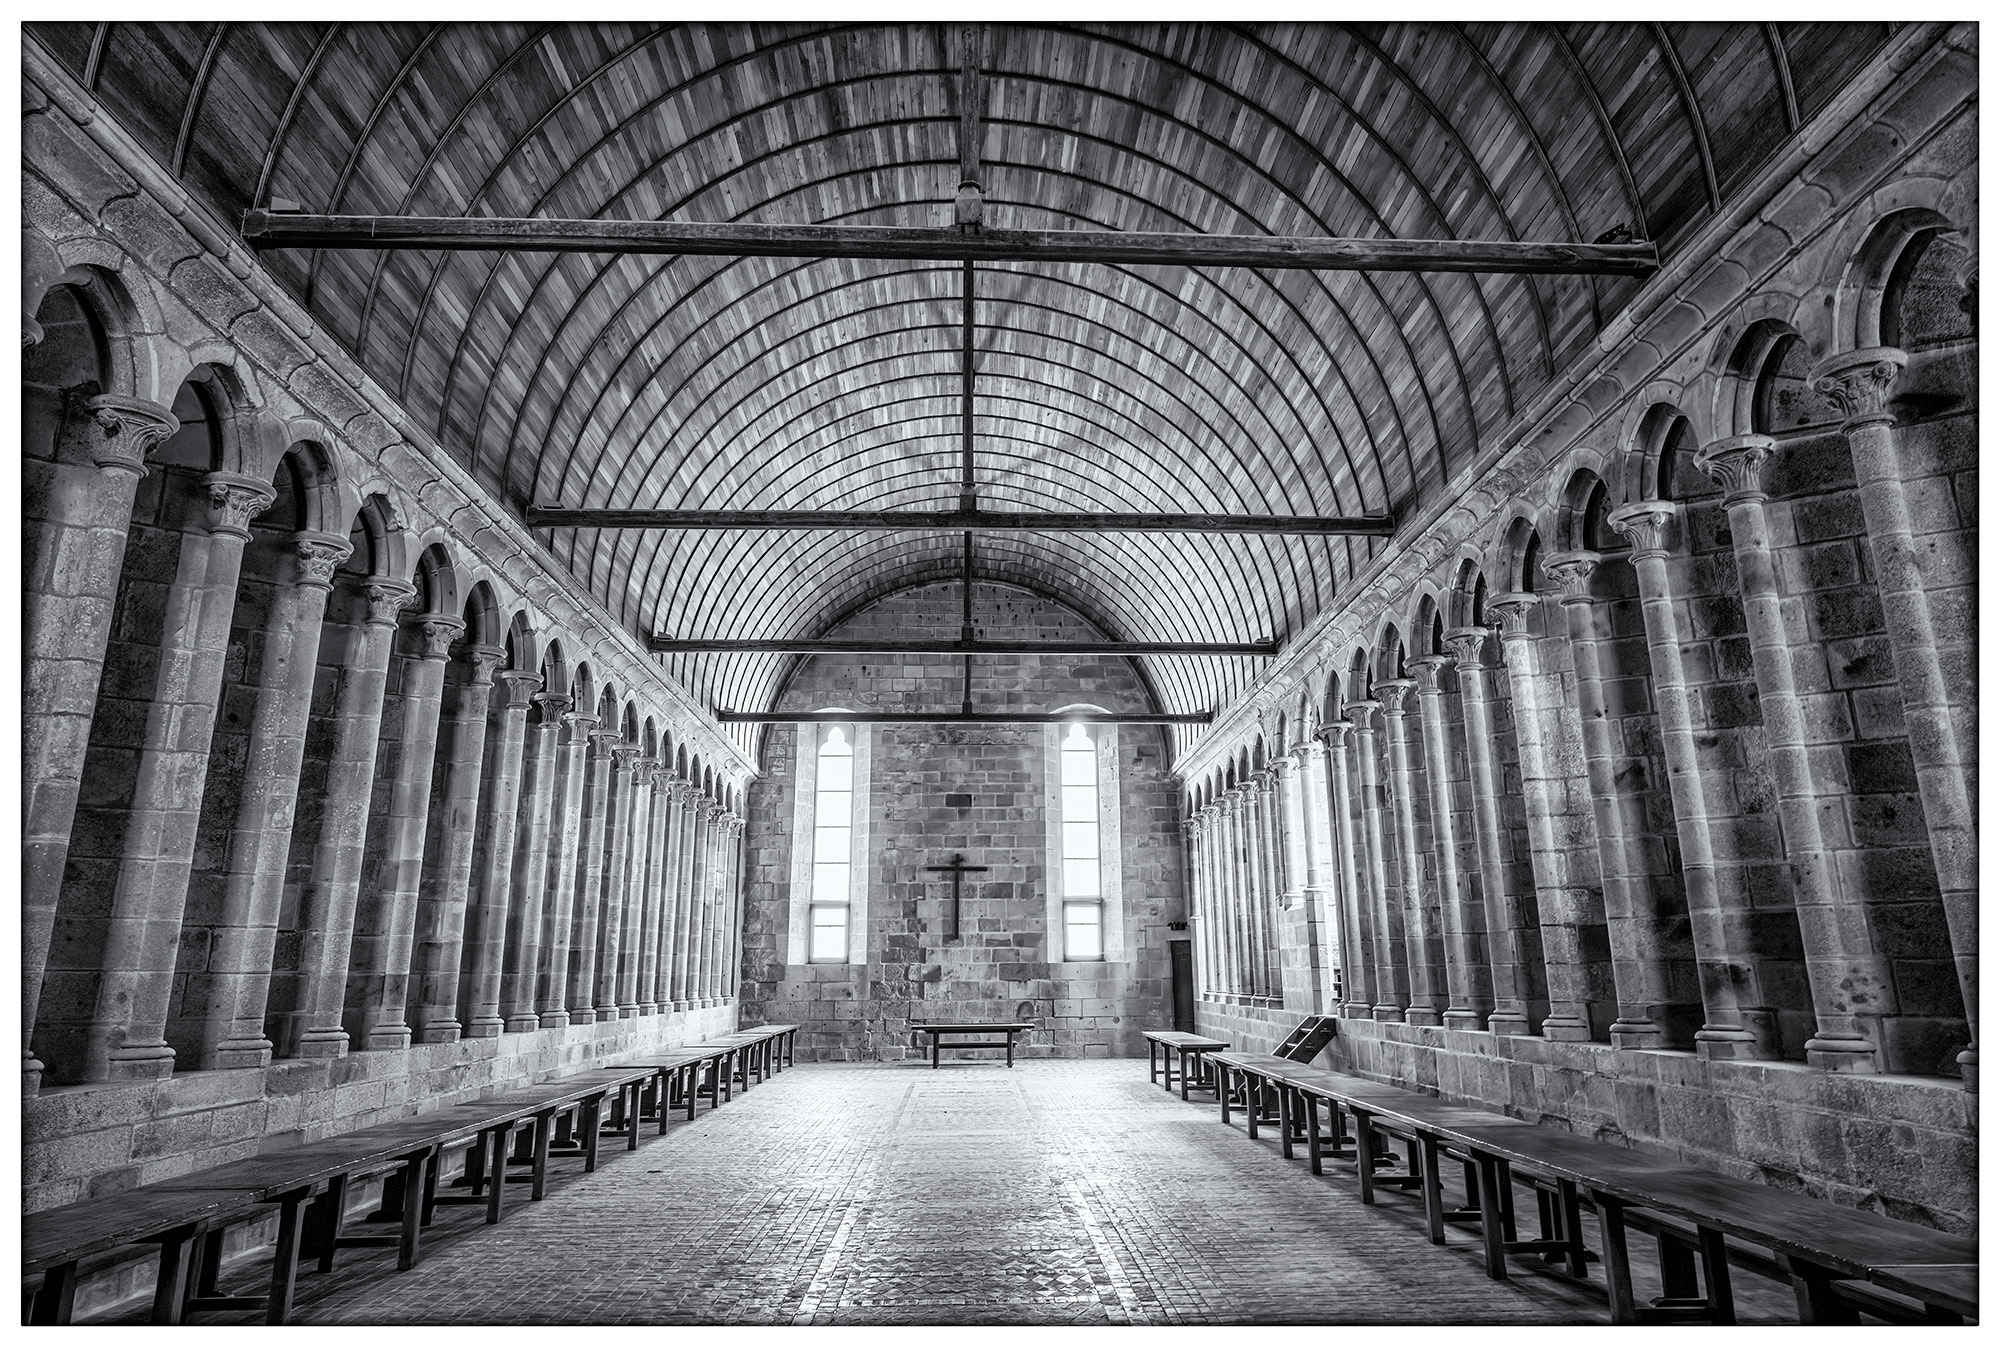 As I entered the refectory of Mont Saint Michel, France, an enchanting composition of light and shadow caught my eye instantly...